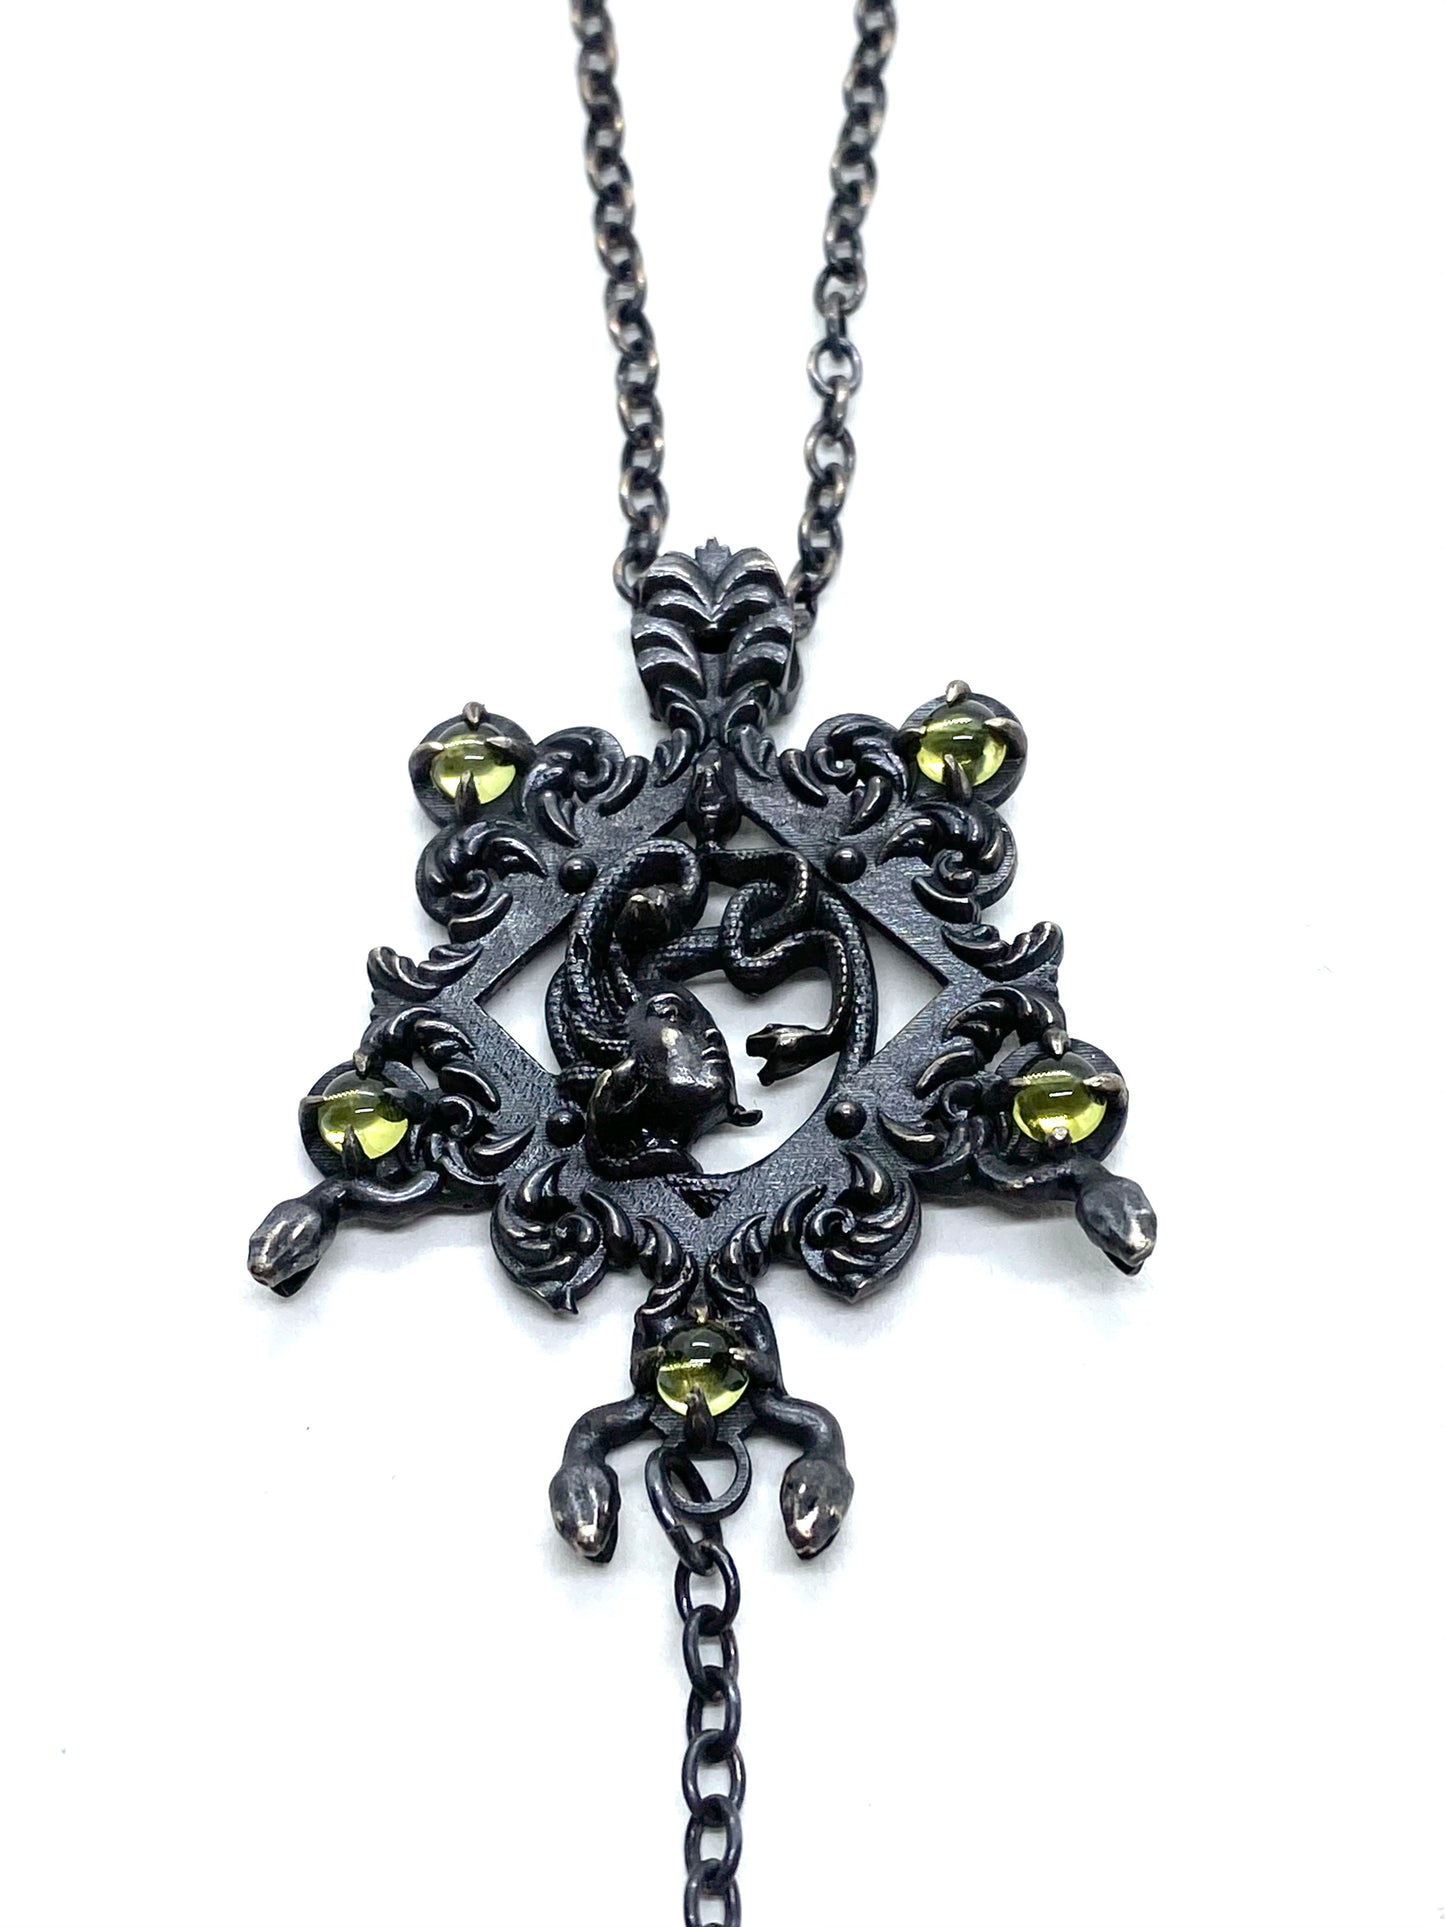 Medusa Shrine Necklace in Bronze and Peridot